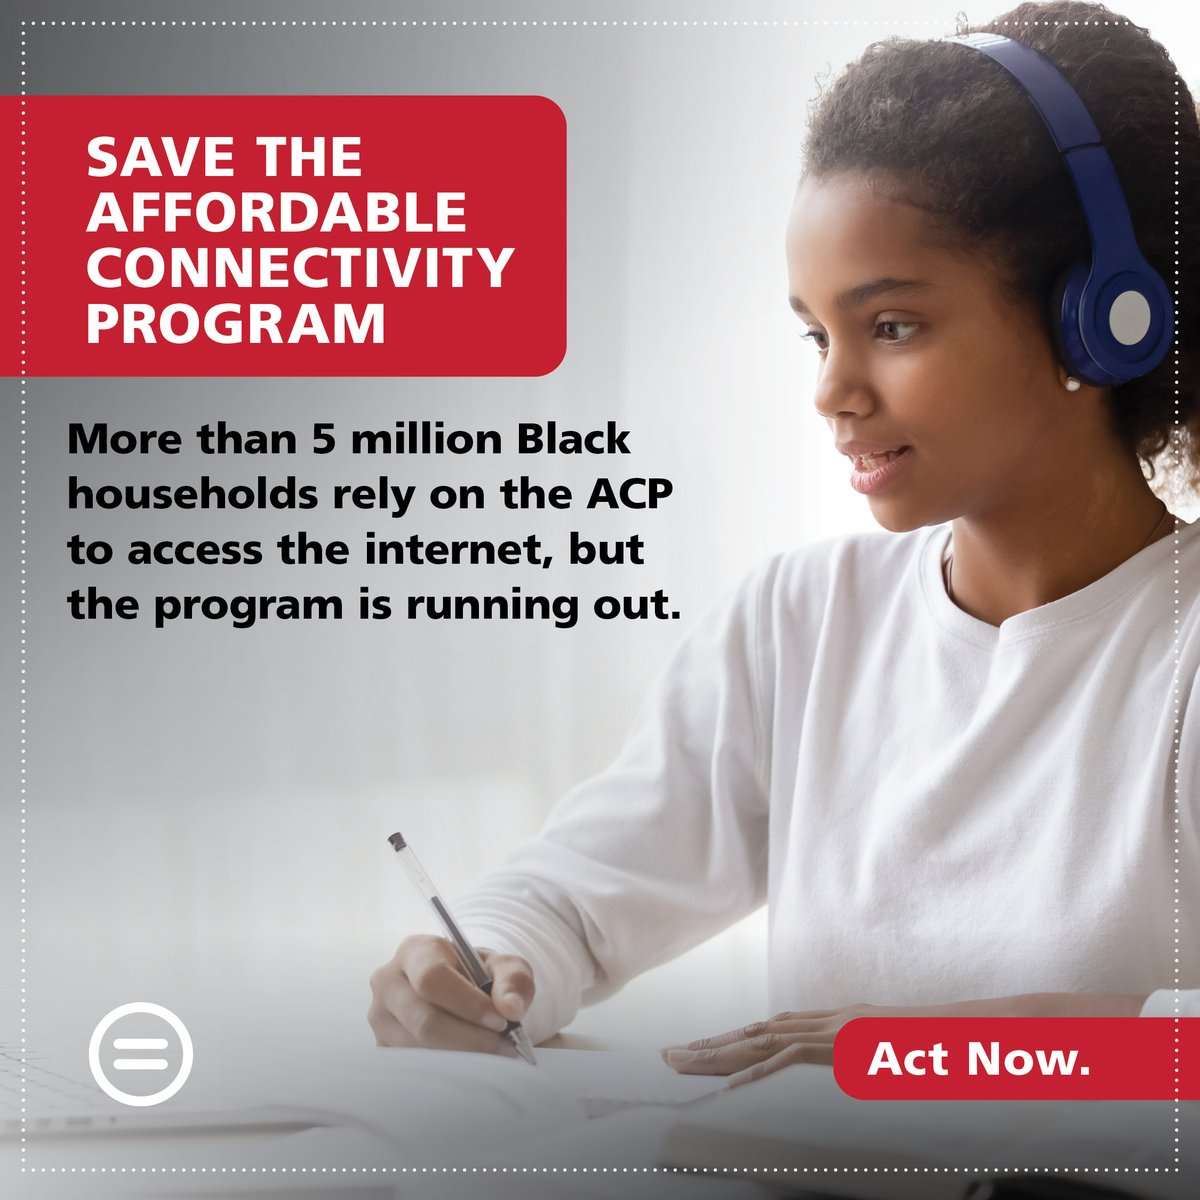 ⚠️ Millions of Black households are at risk of losing their free or low-cost internet access if Congress doesn't extend funding for the Affordable Connectivity Program. Take quick action to #SaveACP: bit.ly/SaveACP.